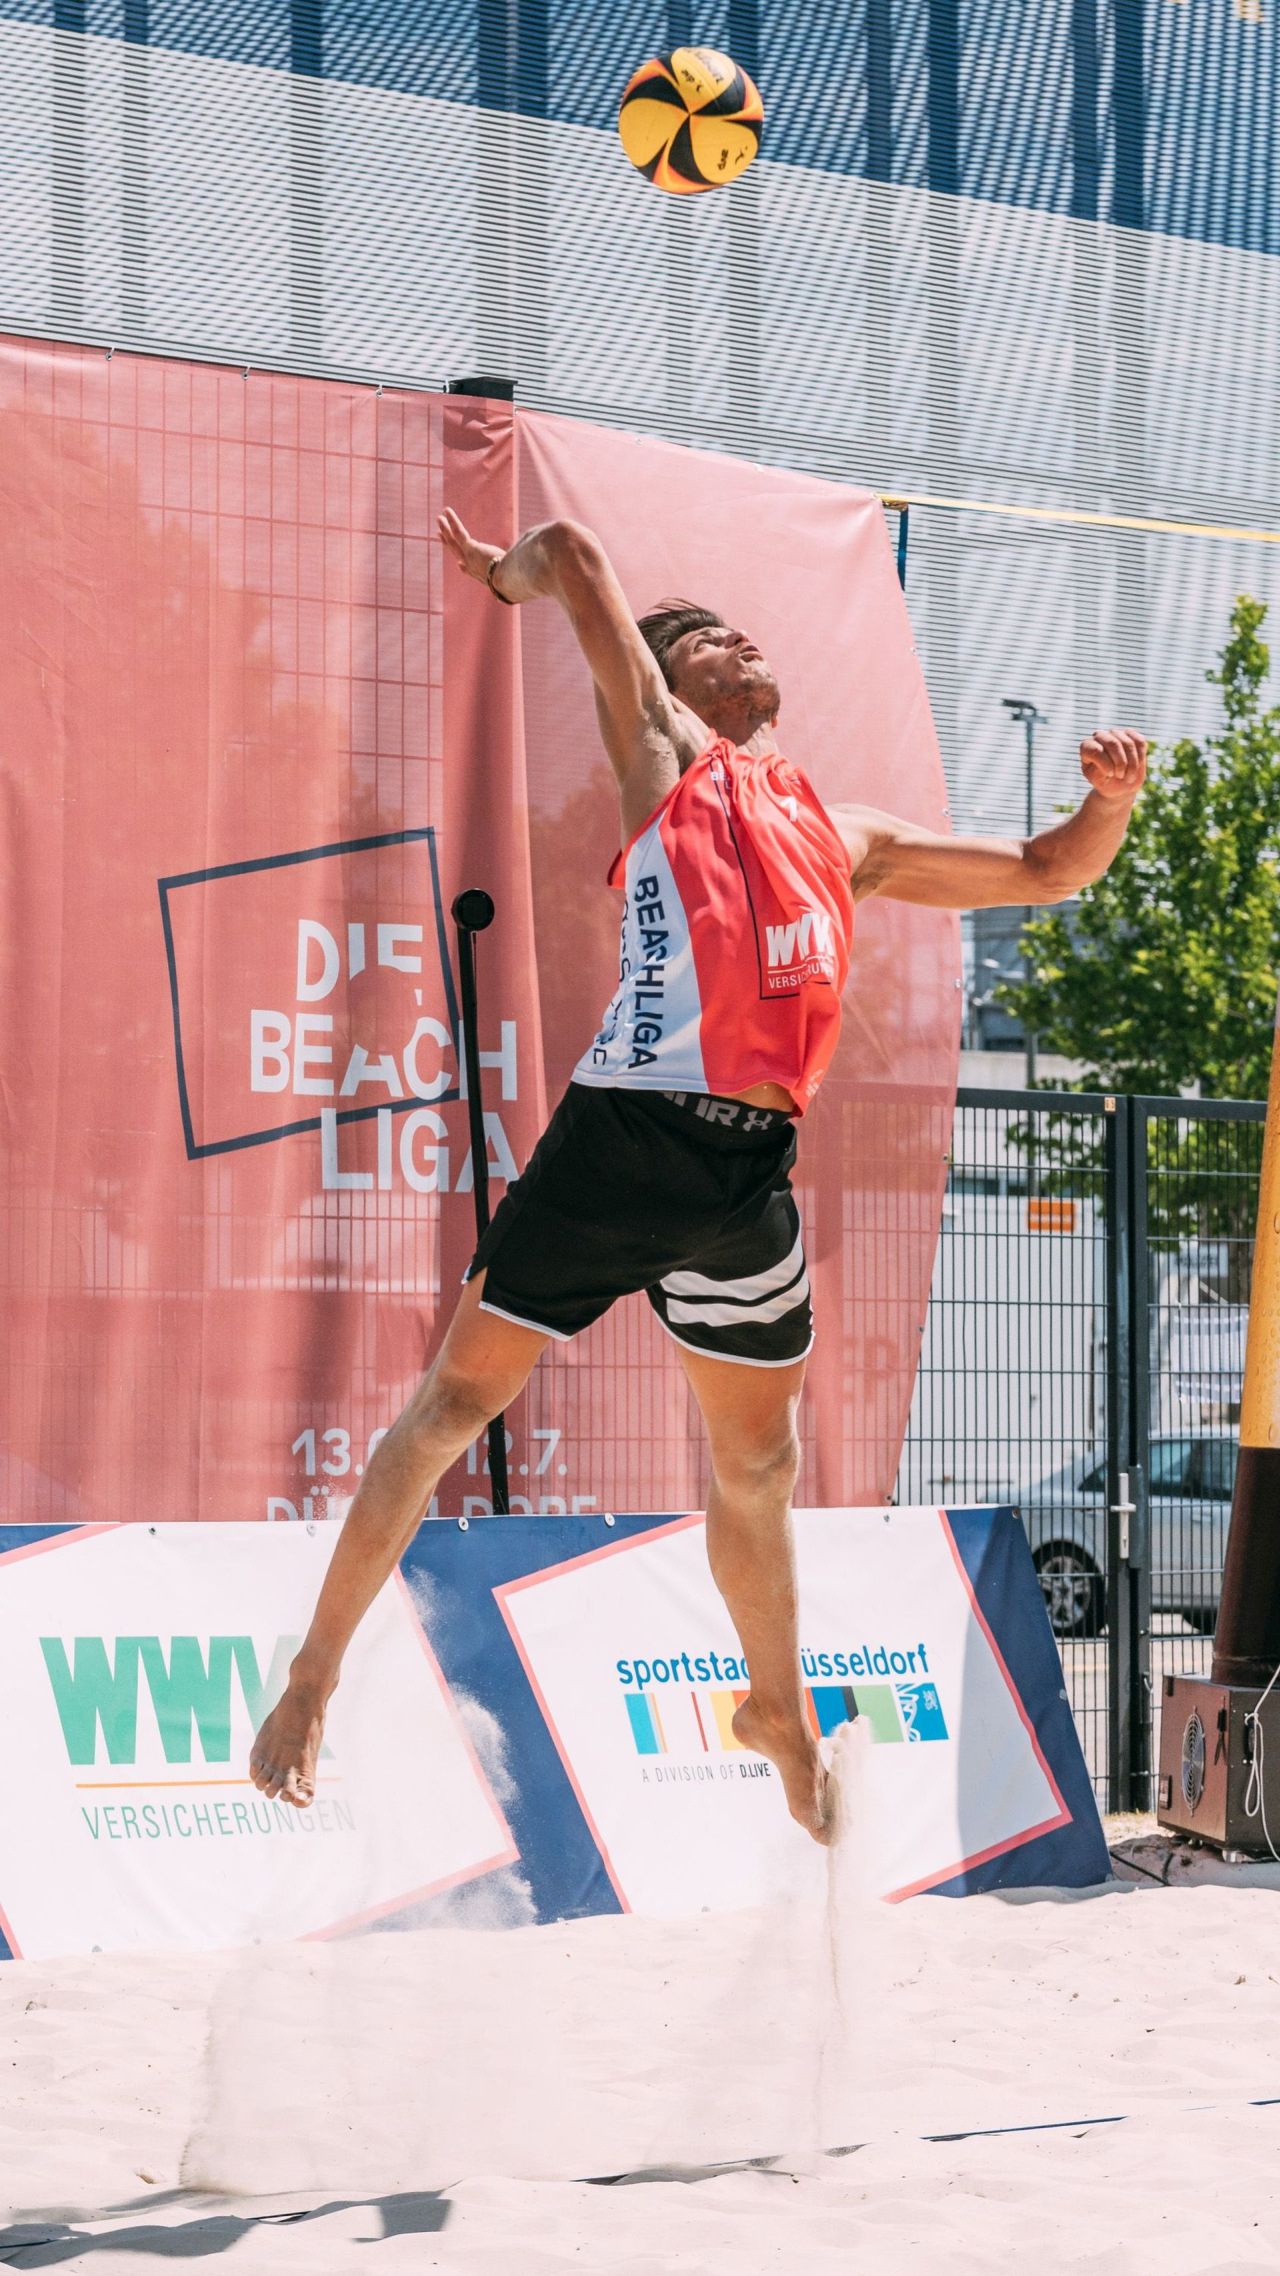 The Beach League – service speed measuring in beach volleyball